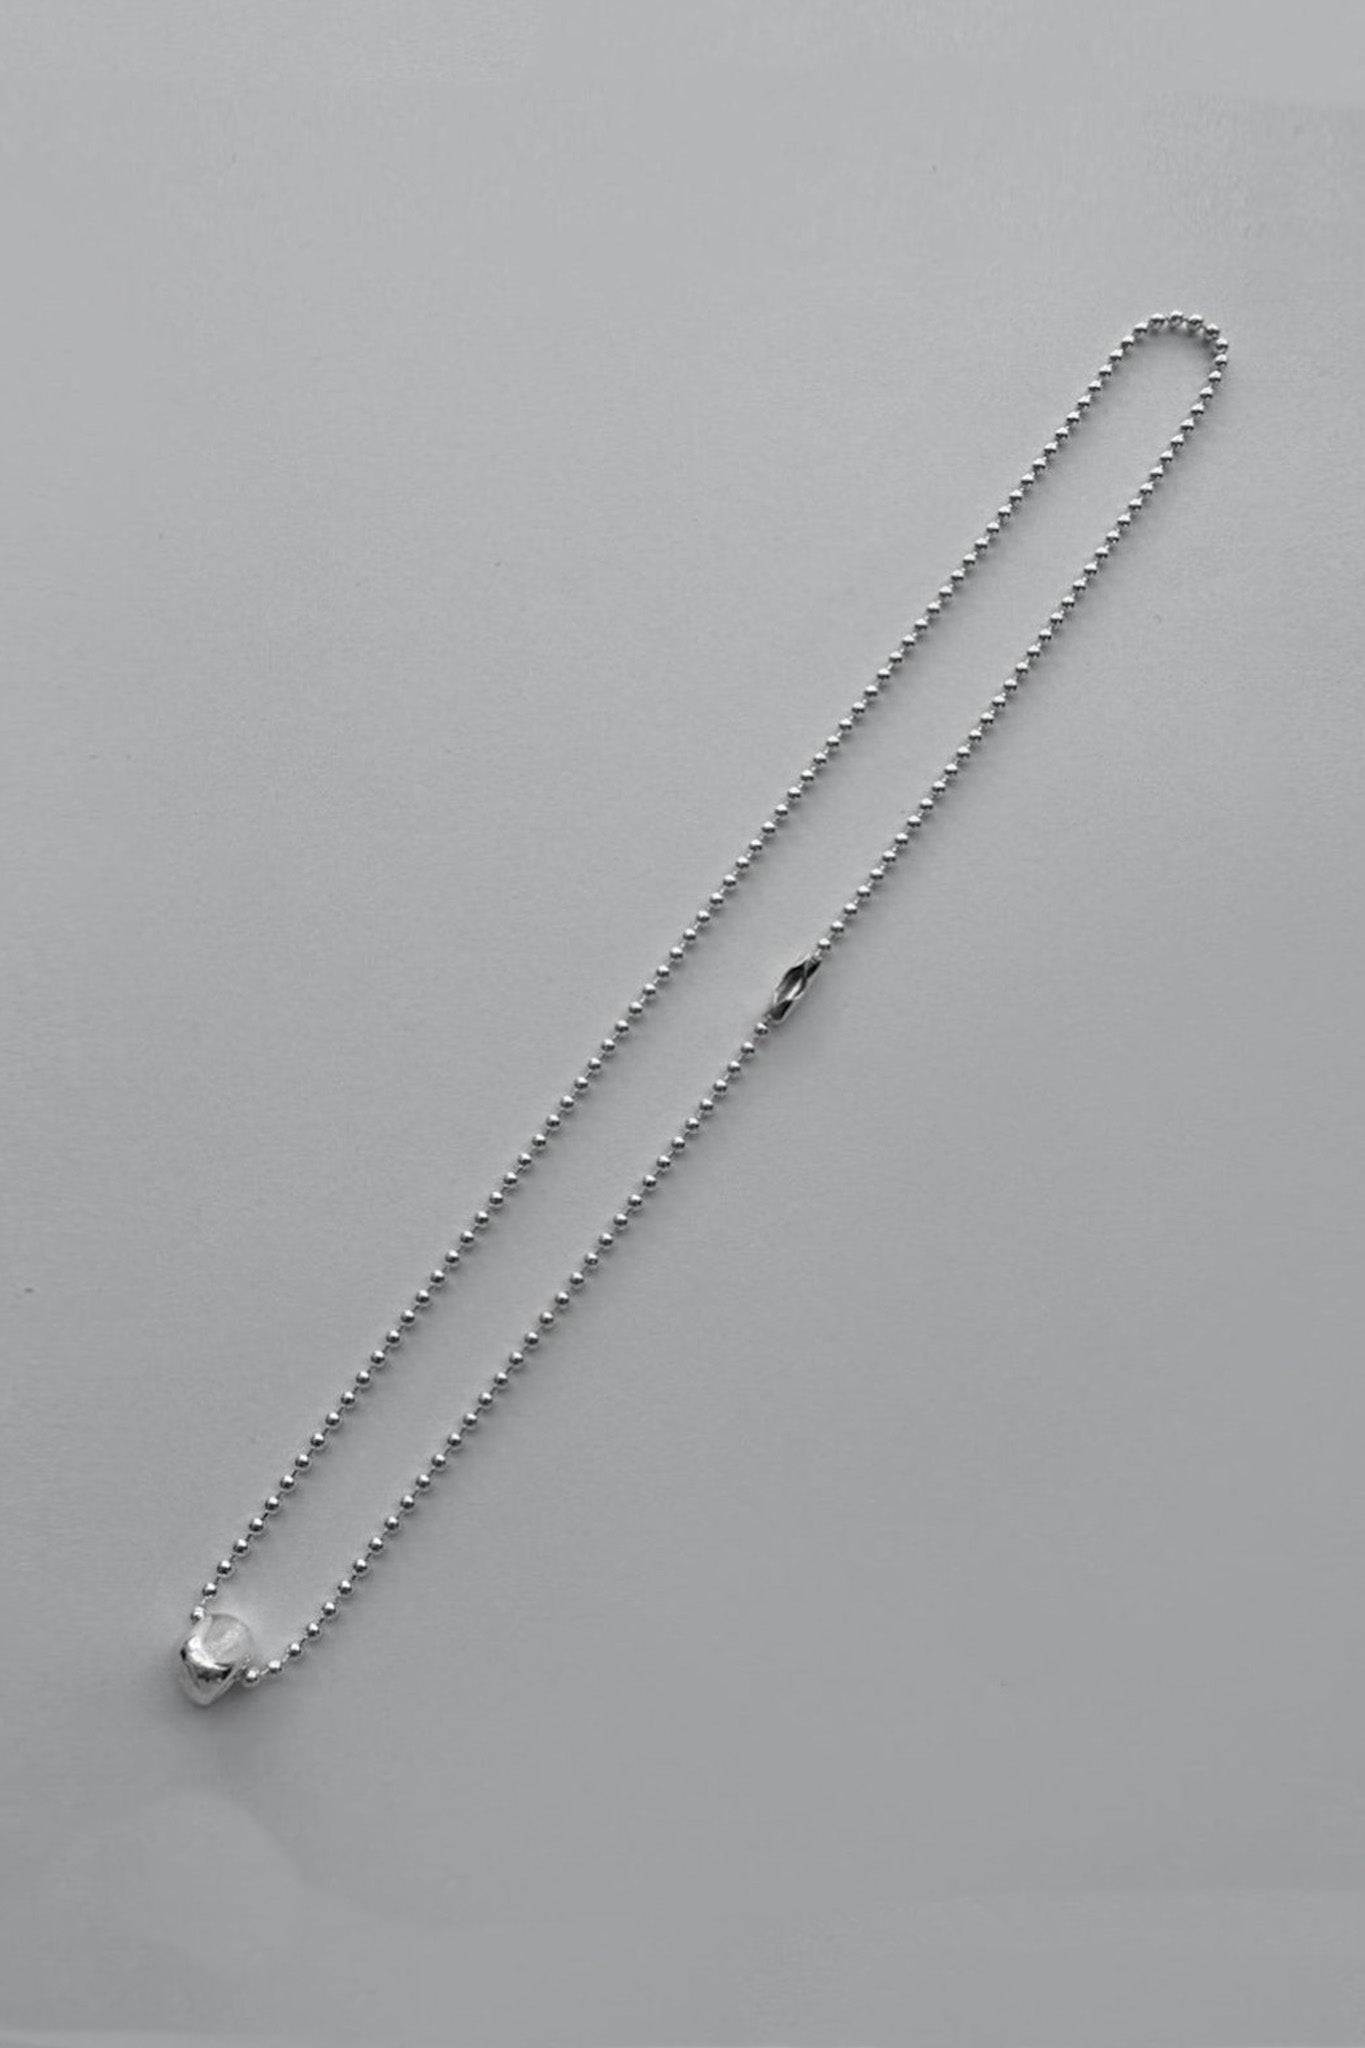 R Pebble necklace in Sterling Silver